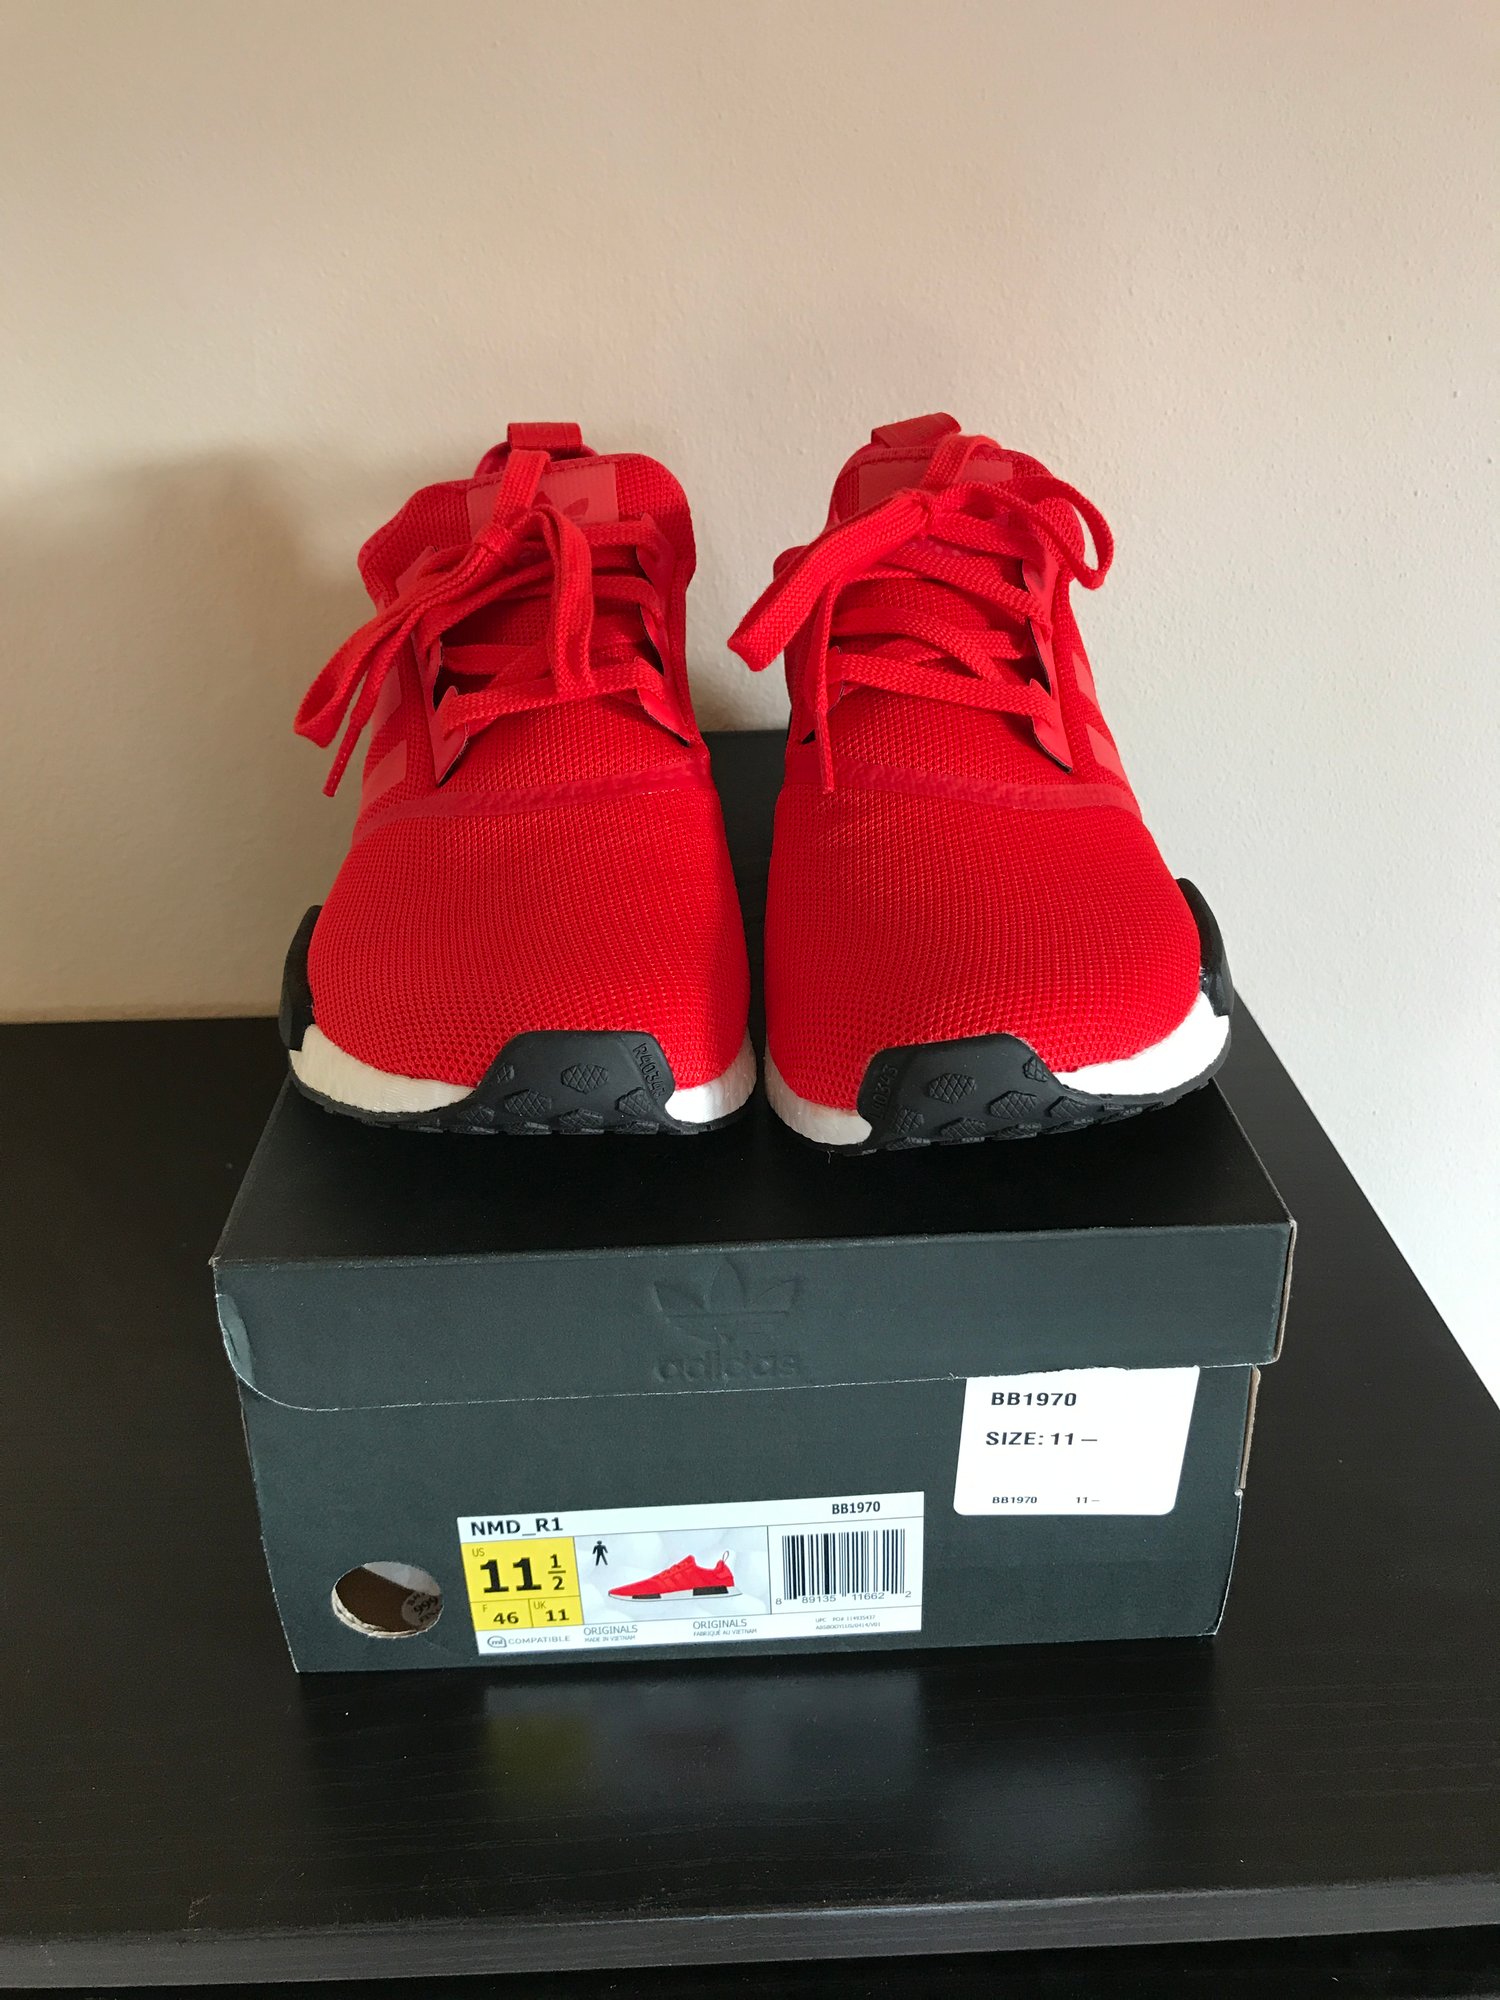 Adidas NMD R1 | KnowSneaks